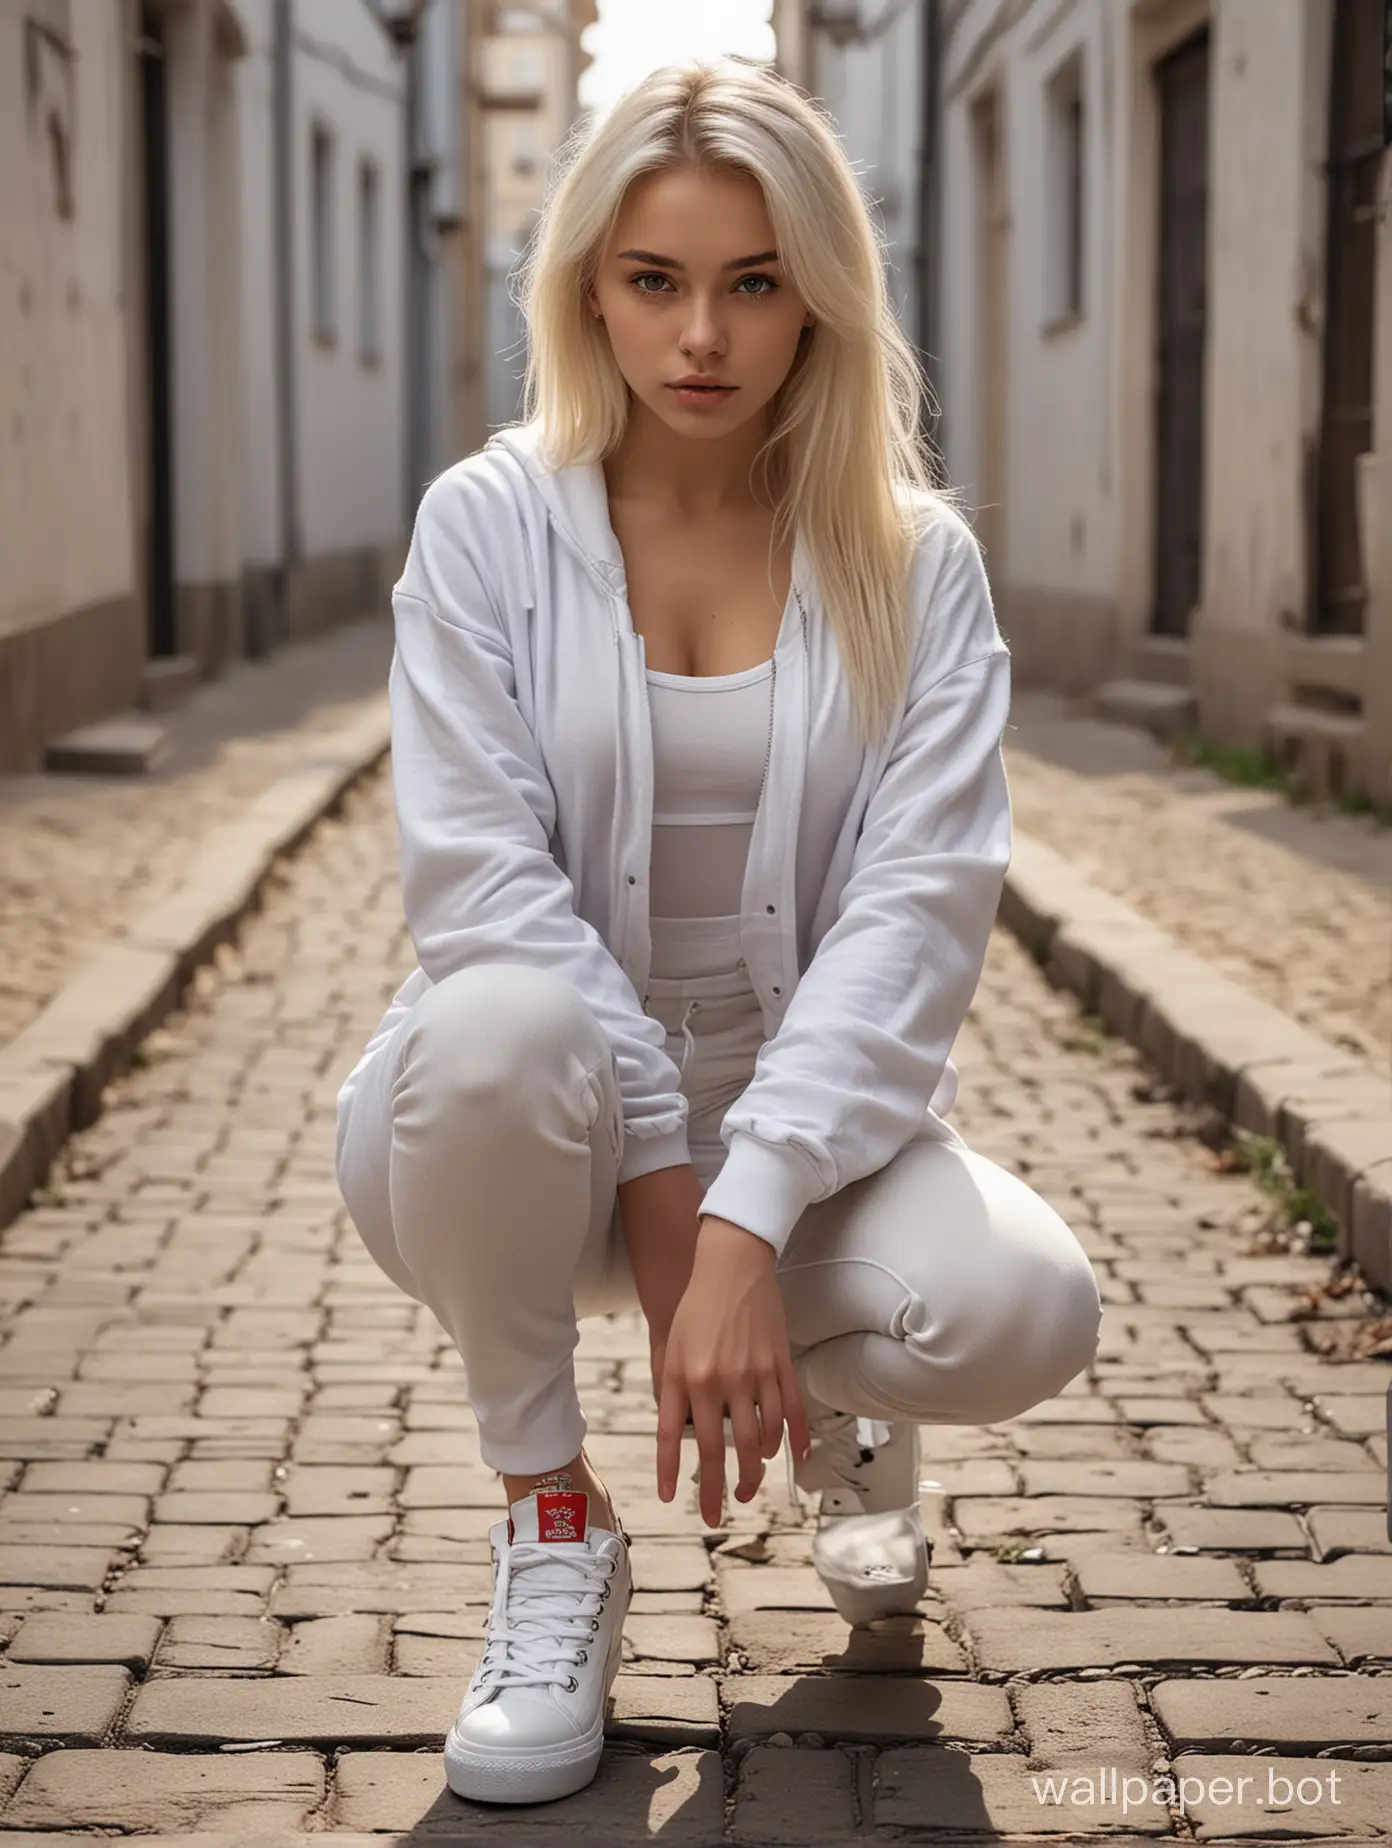 Stunning-Russian-Model-in-Urban-Squatting-Pose-with-Platinum-Blonde-Hair